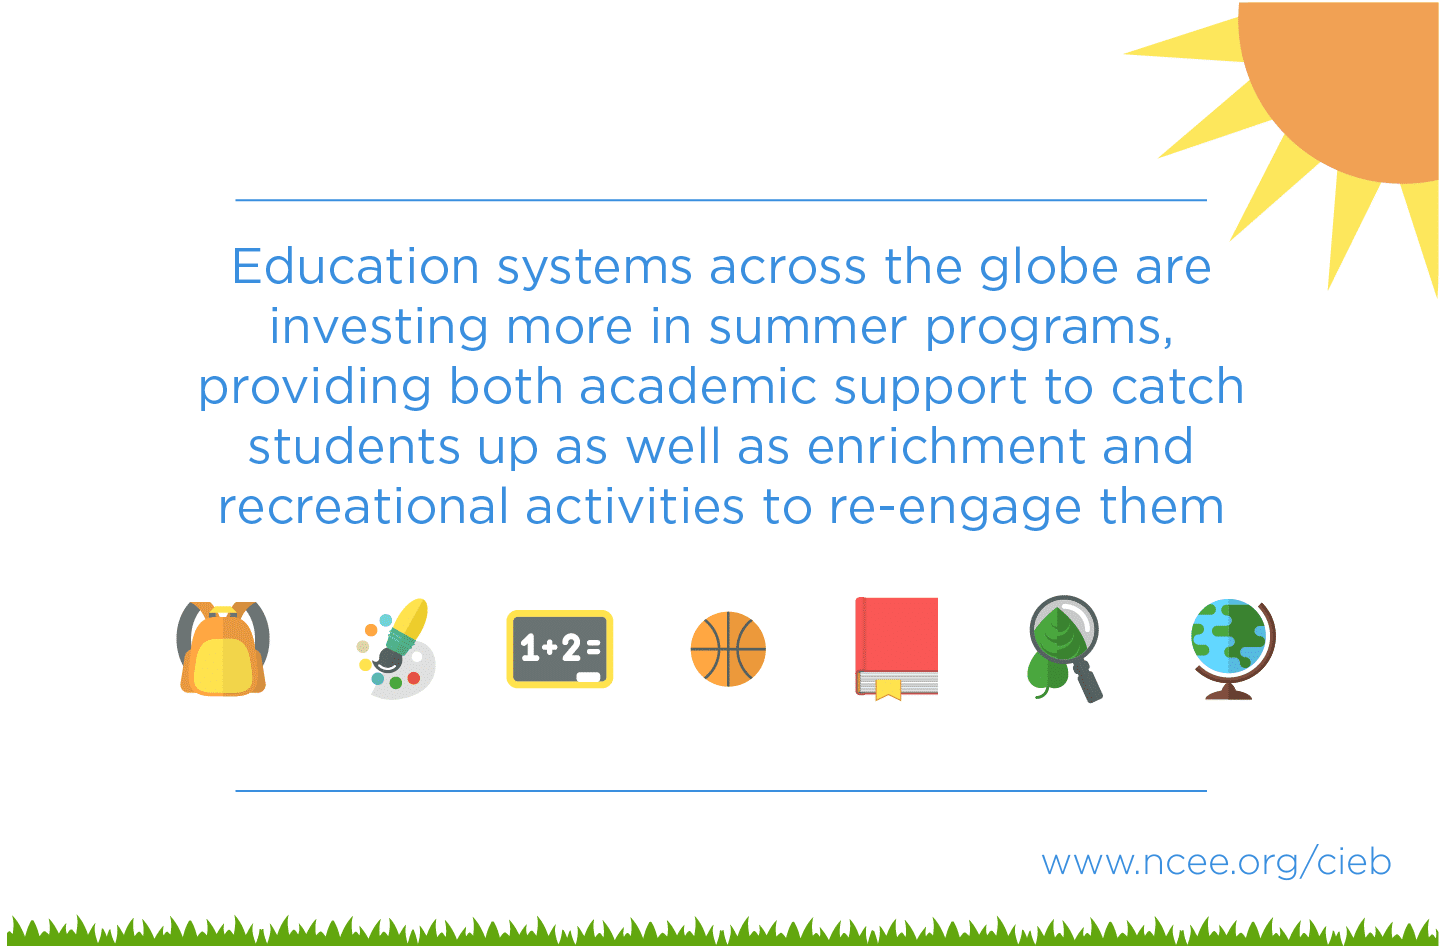 Education systems across the globe are investing more in summer programs, providing both academic support to catch students up as well as enrichment and recreational activities to re-engage them